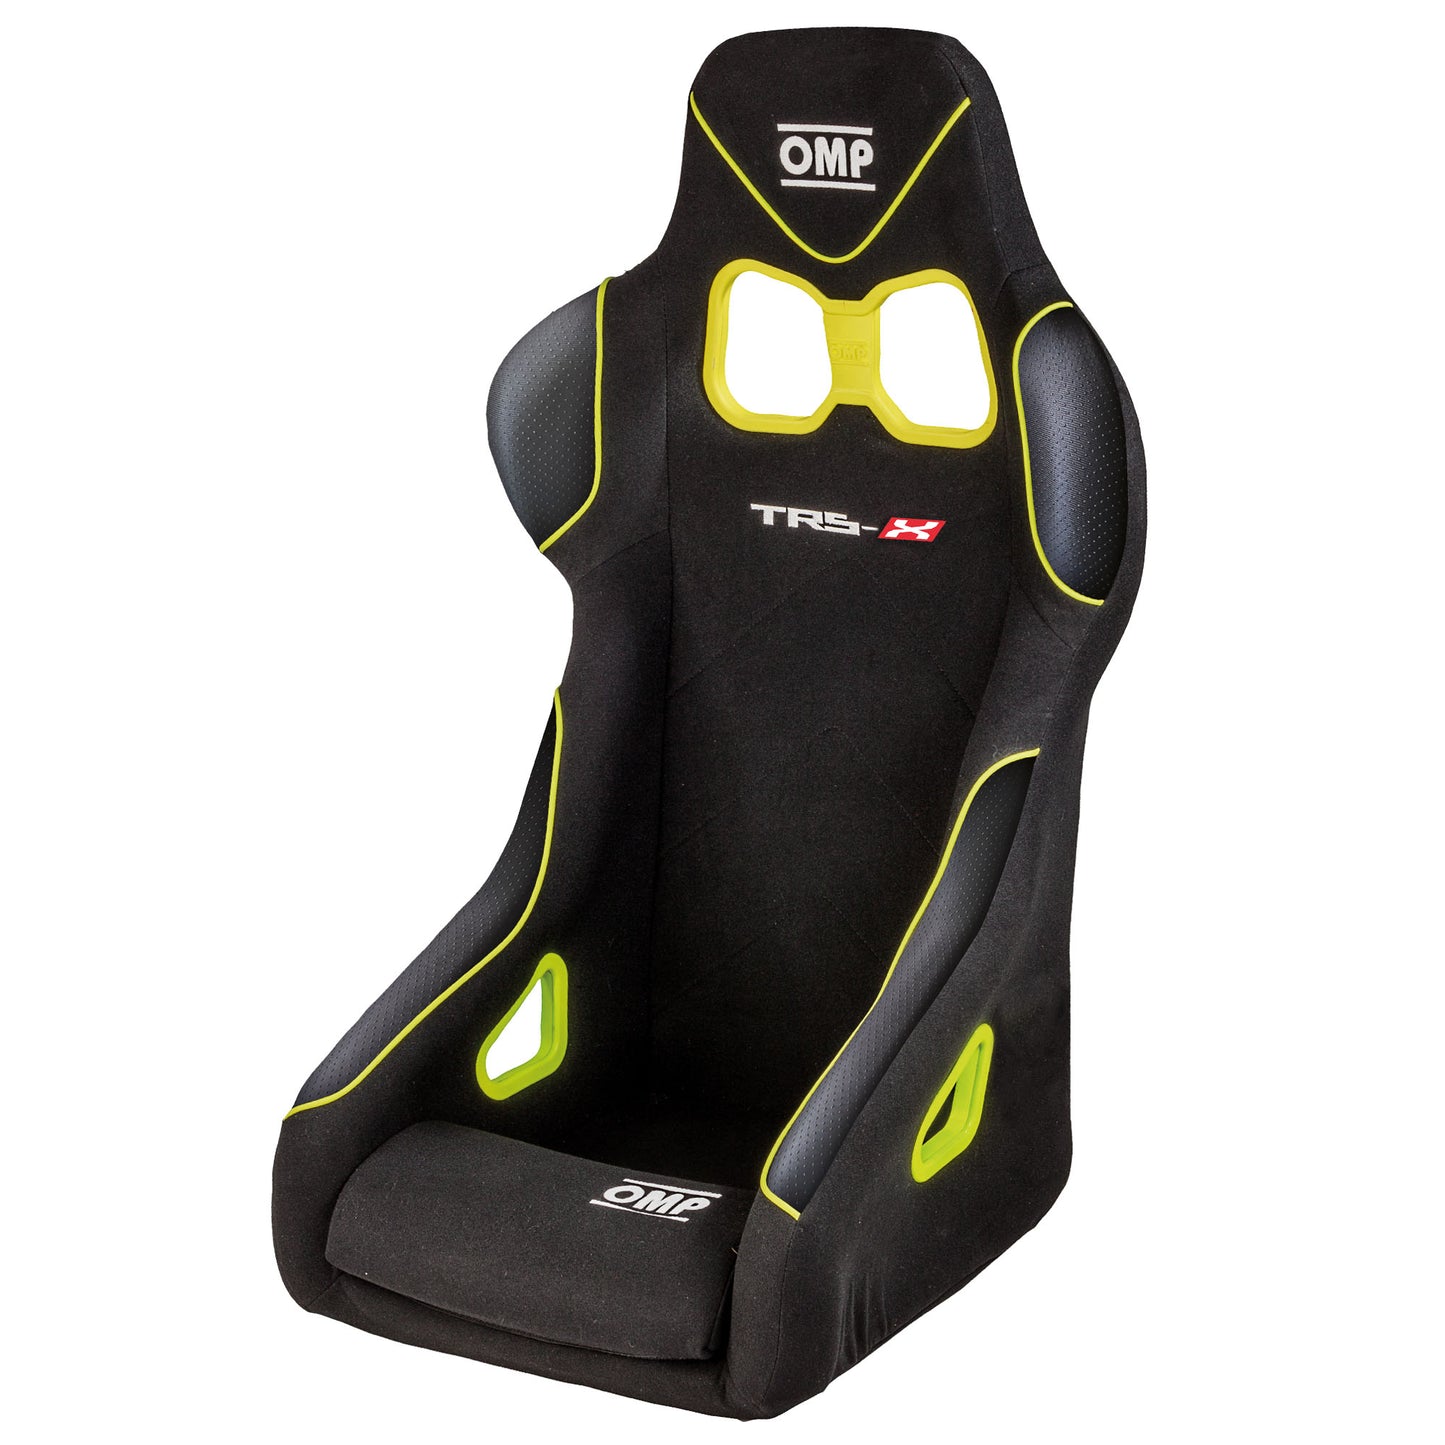 New! 2023 OMP Racing Seat TRS-X Black/Yellow for Race and Rally FIA 8855-1999